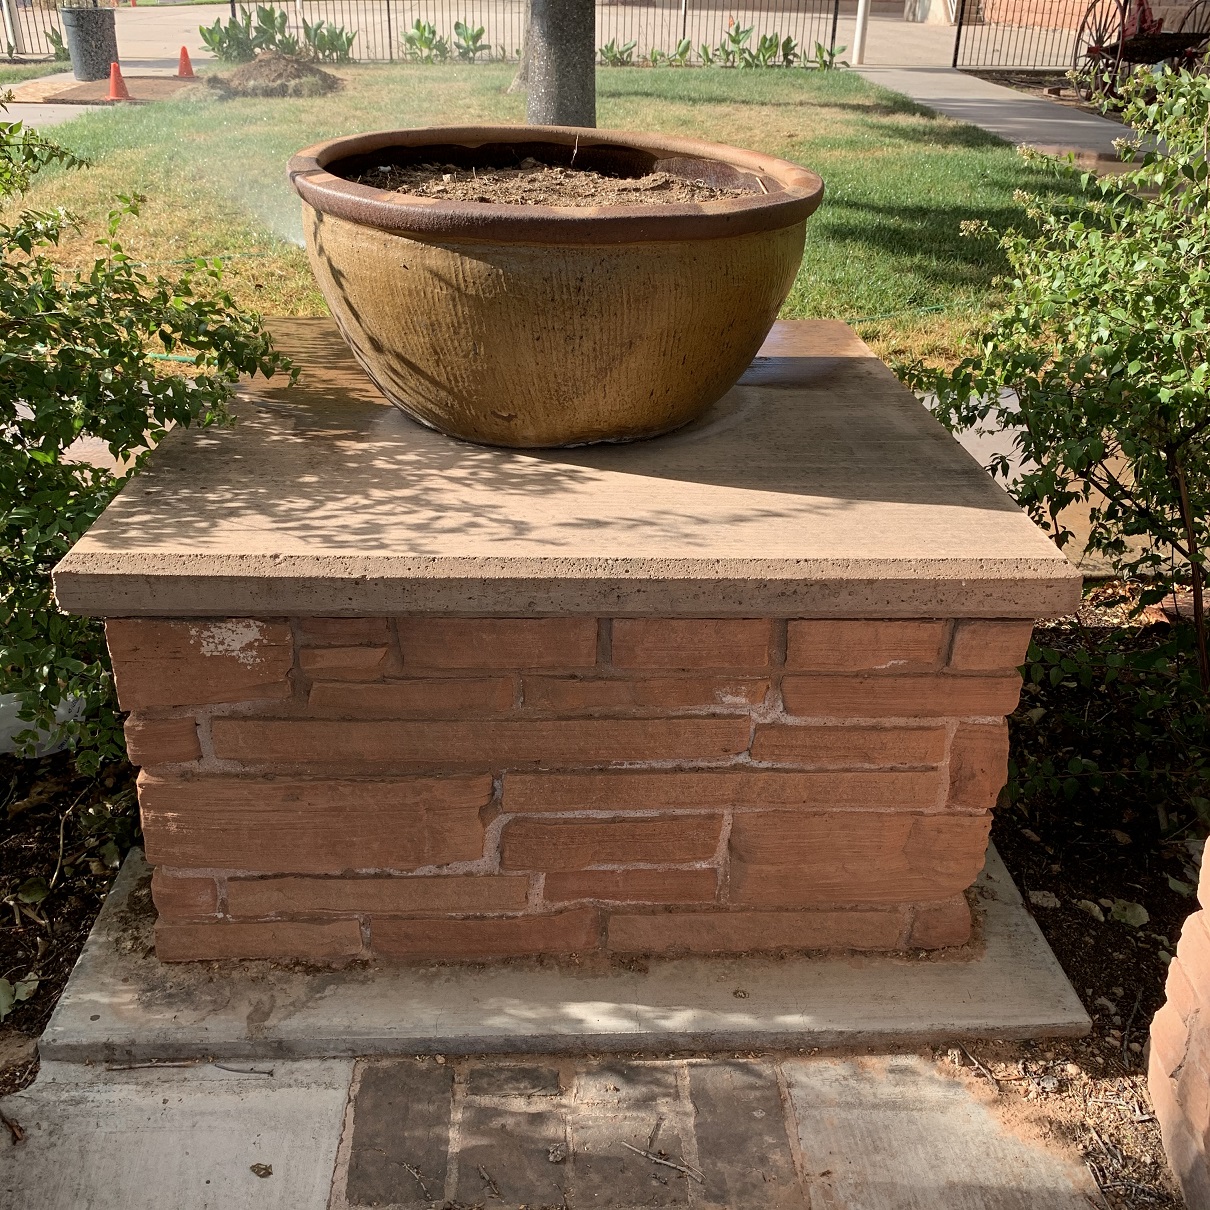 Pedestal with a pot on top at the Monument Plaza in Washington, Utah